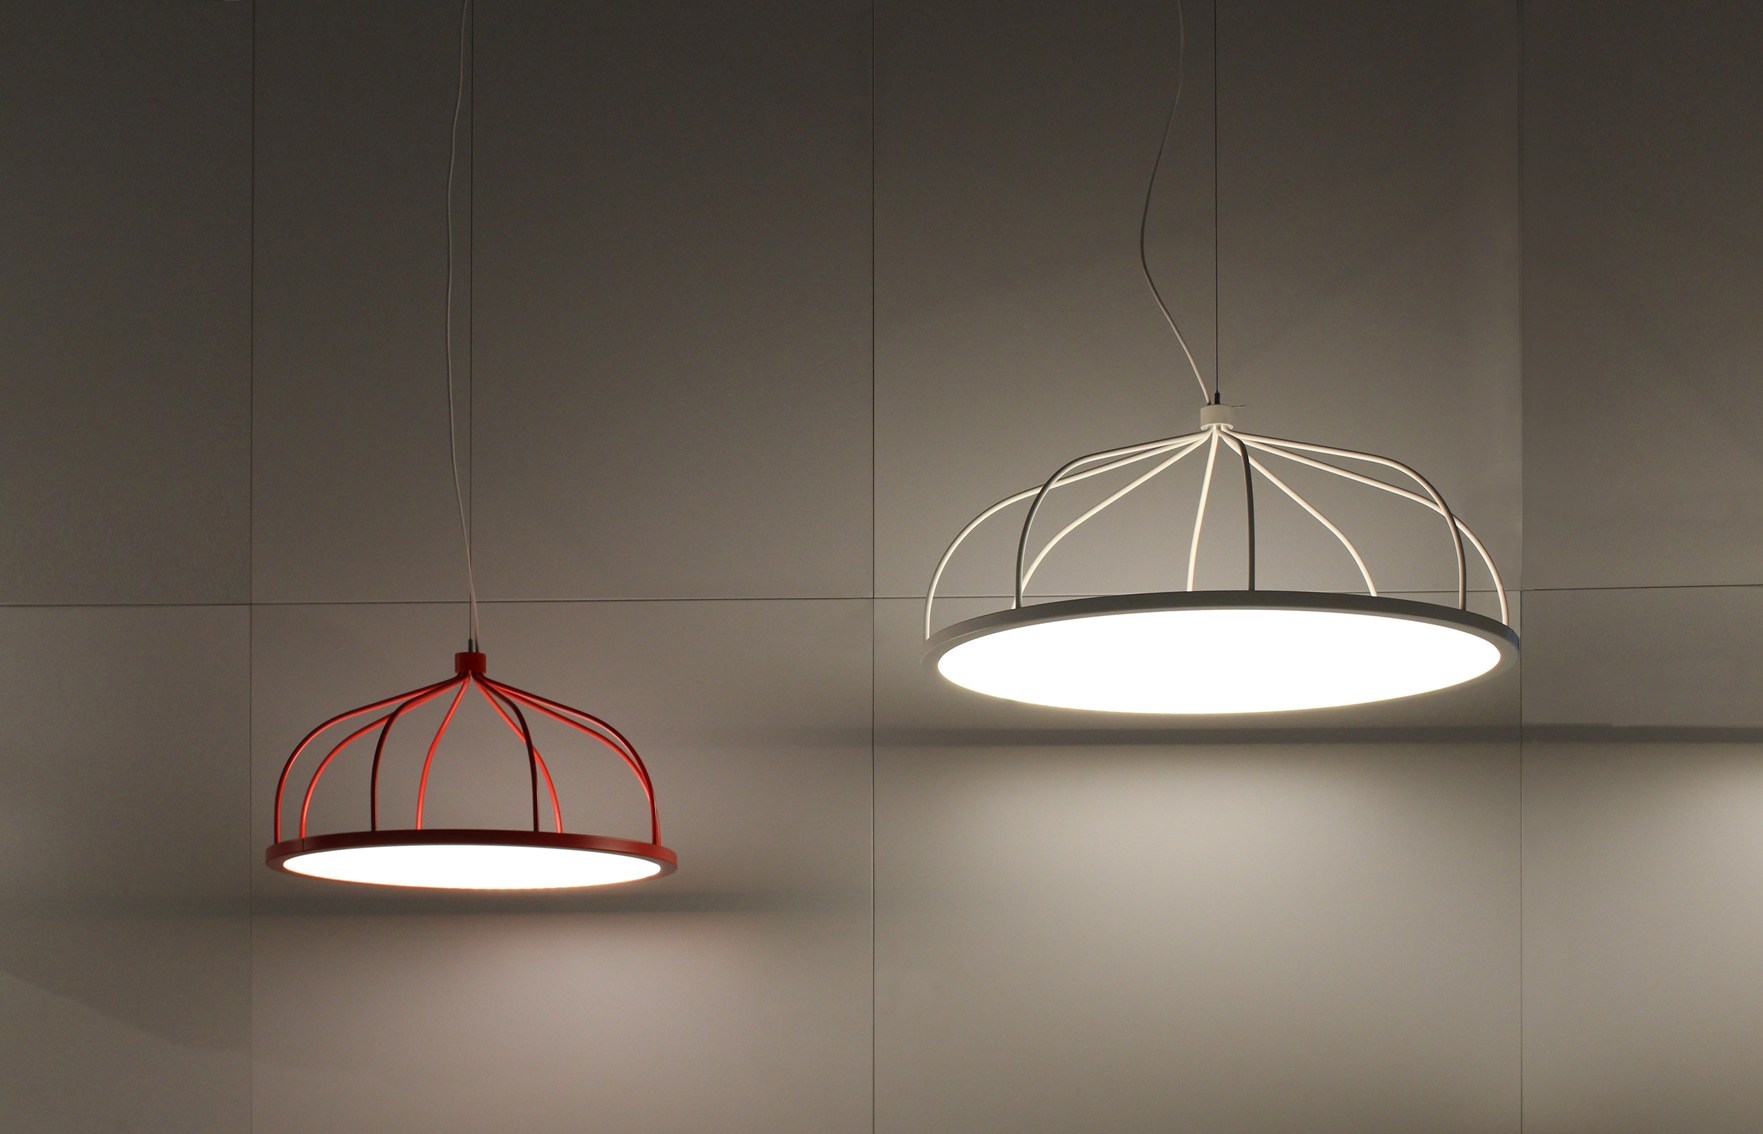 Plane Lamps by Front for Zero